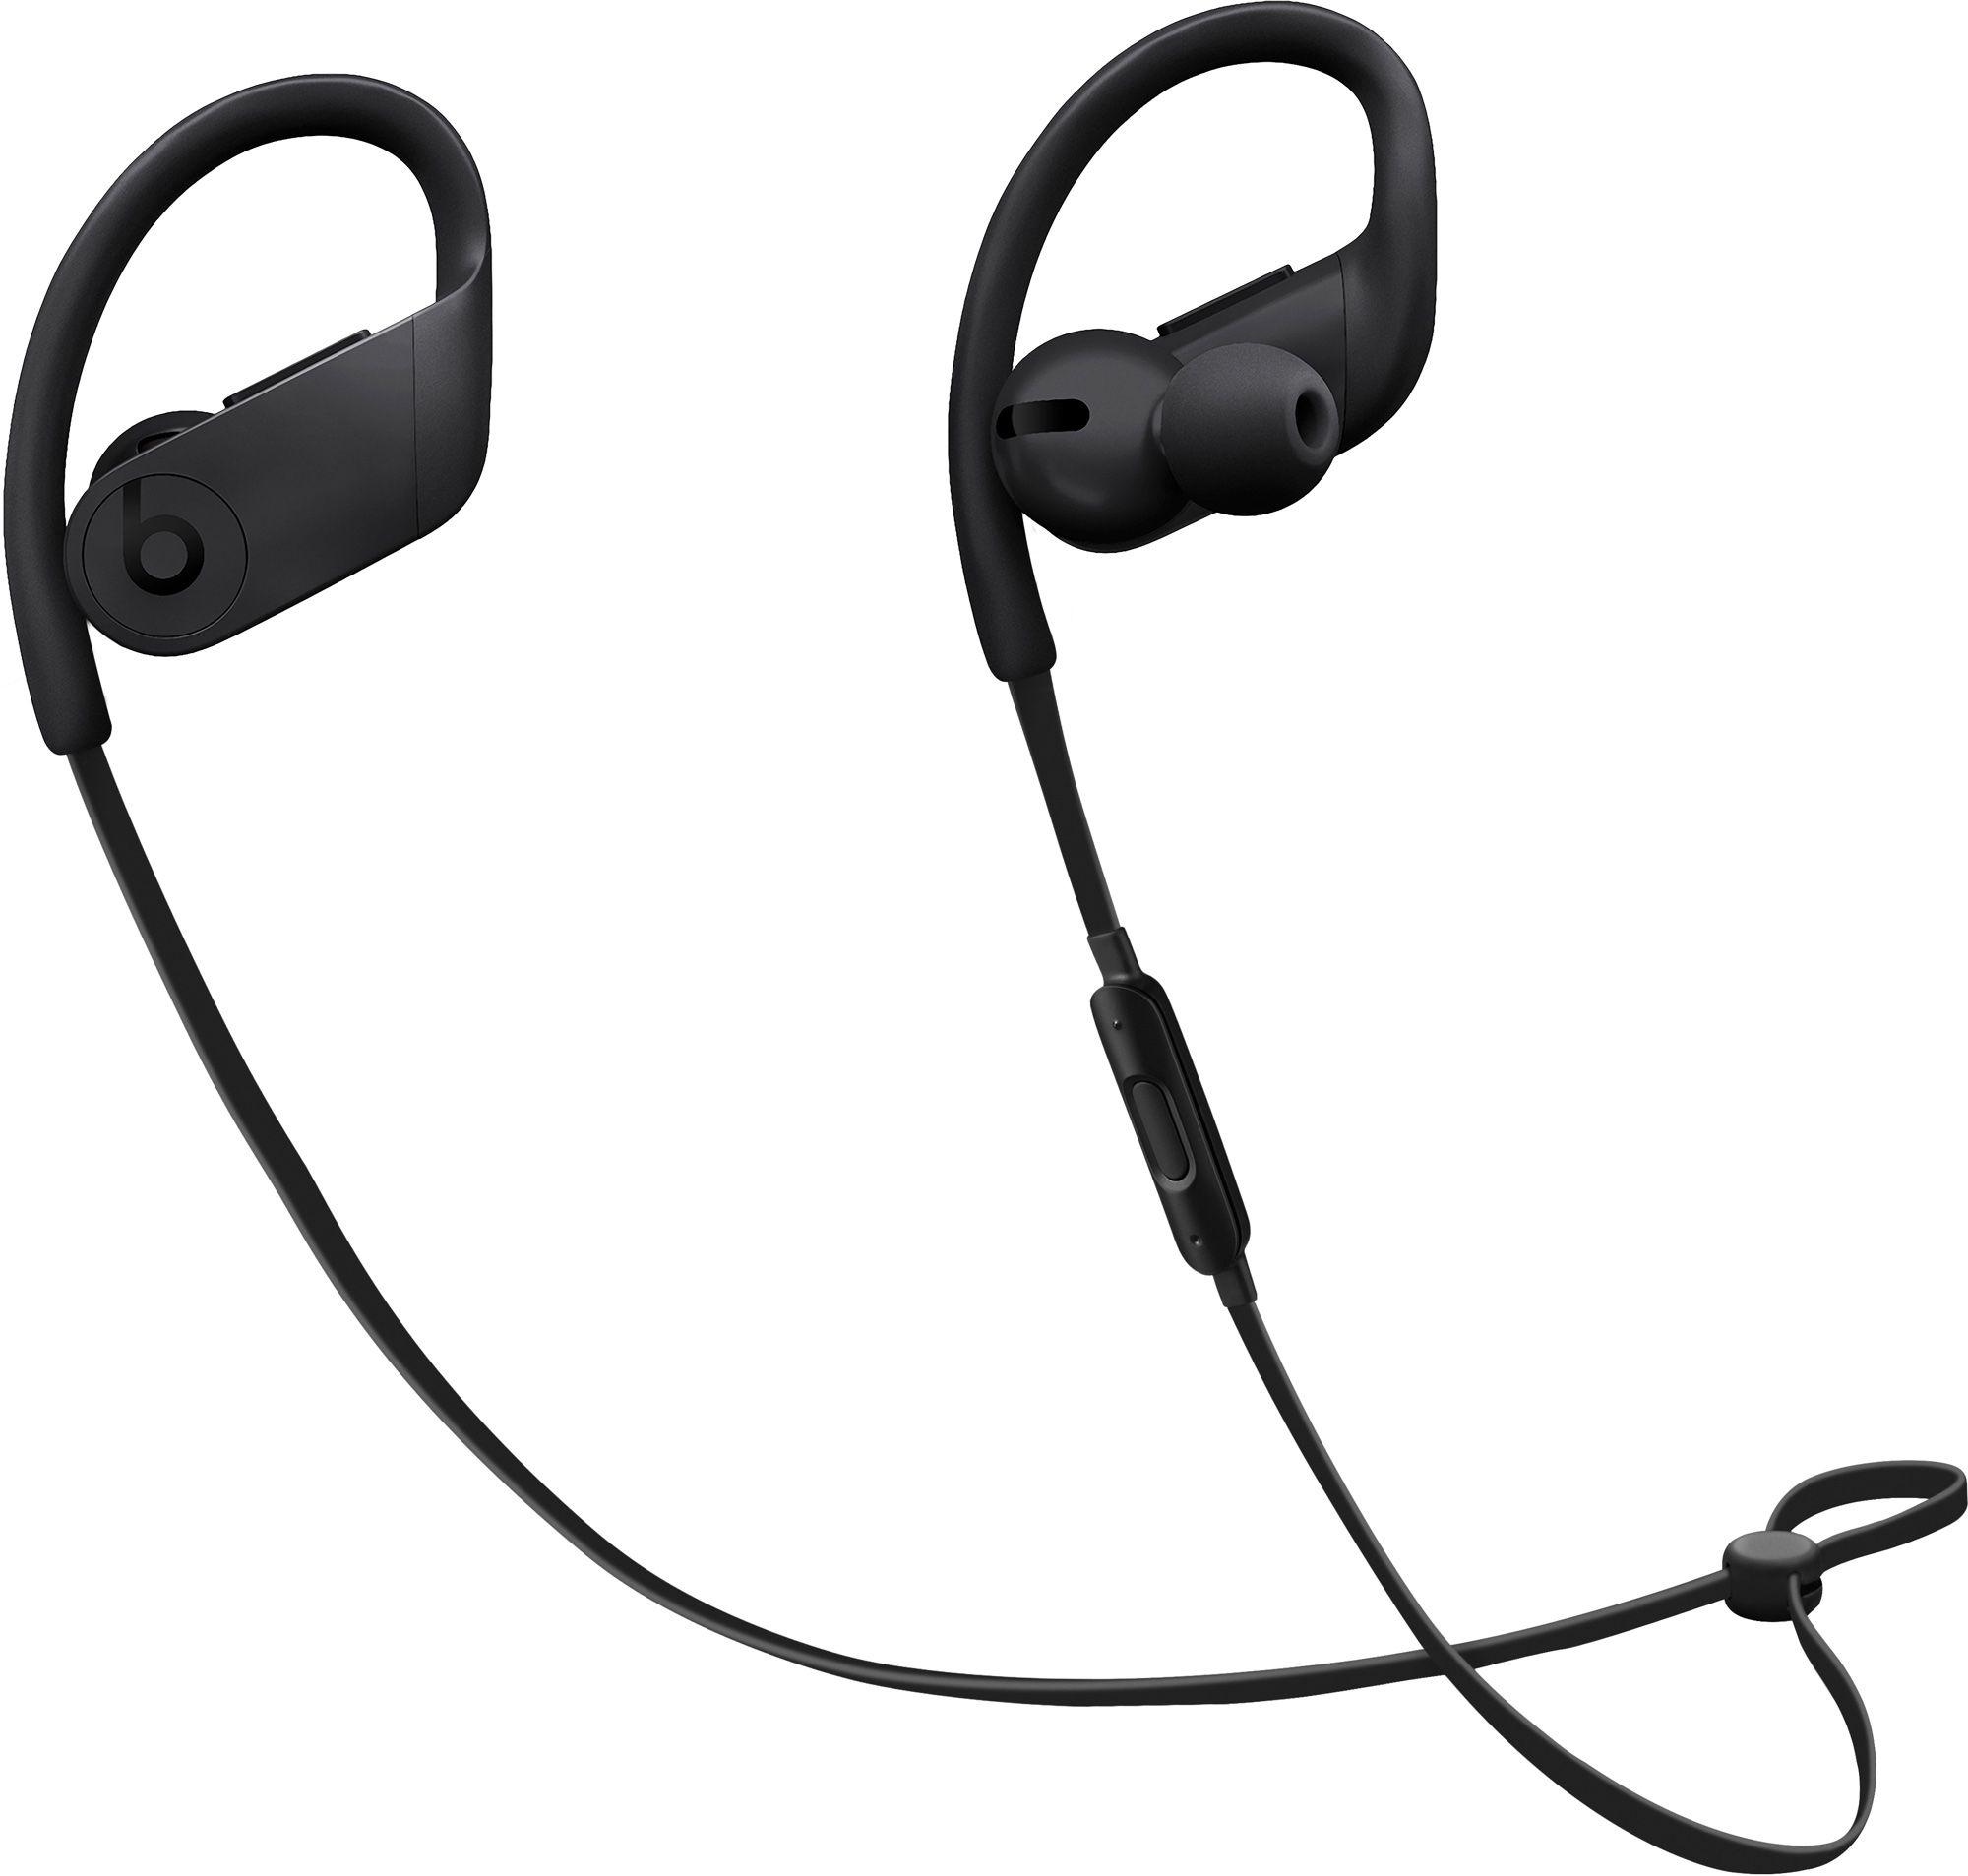 Apple's $149 Powerbeats Earbuds: Everything You Need to Know ...